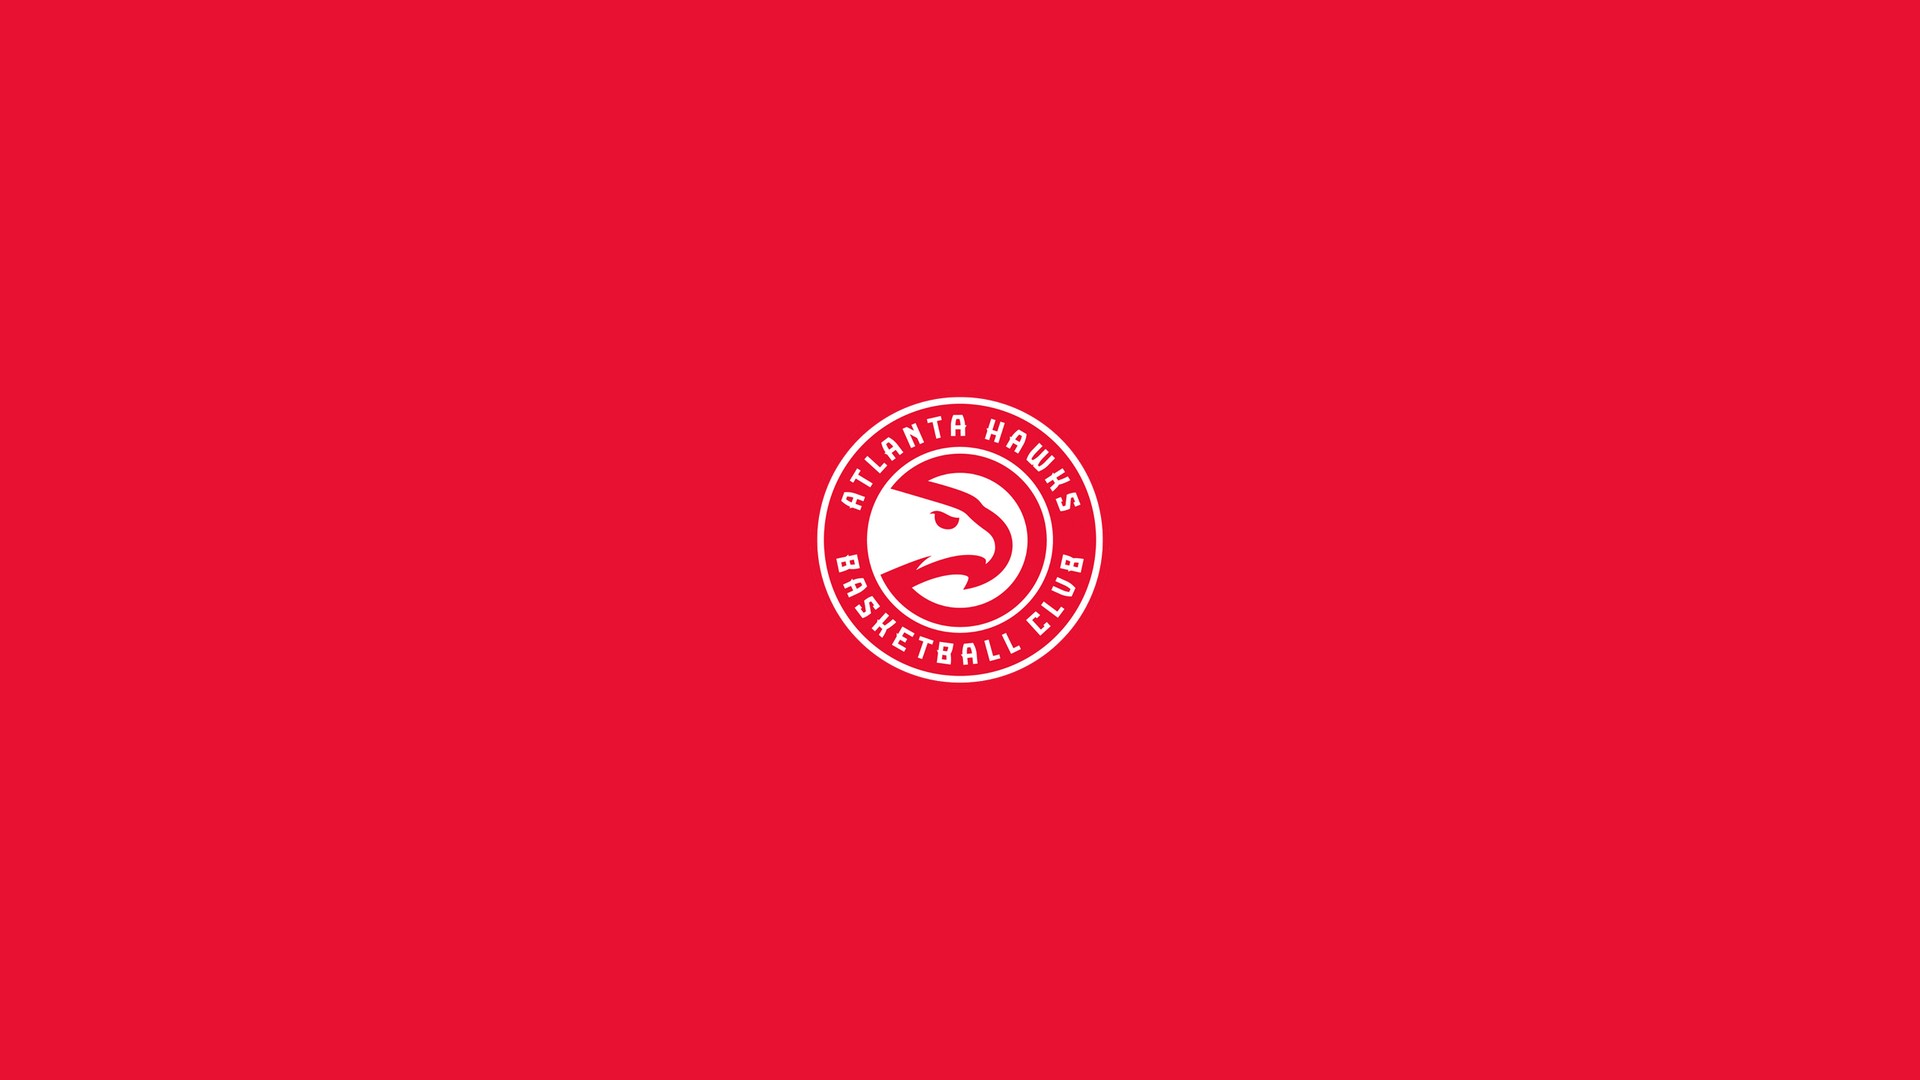 Backgrounds Atlanta Hawks HD with image dimensions 1920x1080 pixel. You can make this wallpaper for your Desktop Computer Backgrounds, Windows or Mac Screensavers, iPhone Lock screen, Tablet or Android and another Mobile Phone device